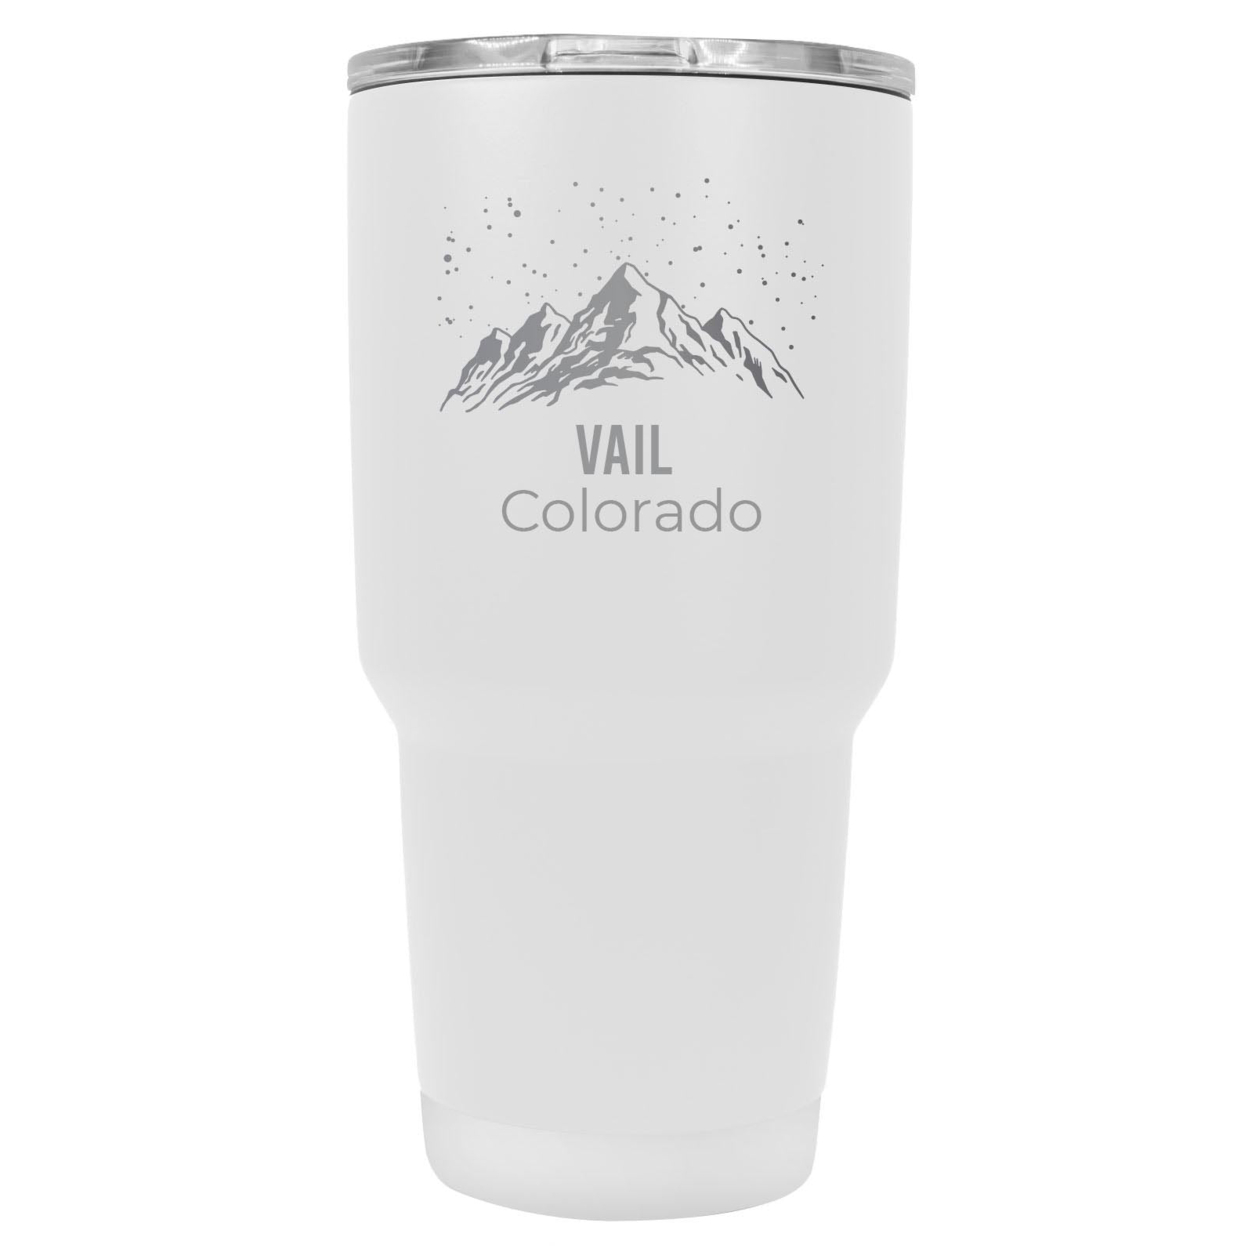 Vail Colorado Ski Snowboard Winter Souvenir Laser Engraved 24 Oz Insulated Stainless Steel Tumbler - Red